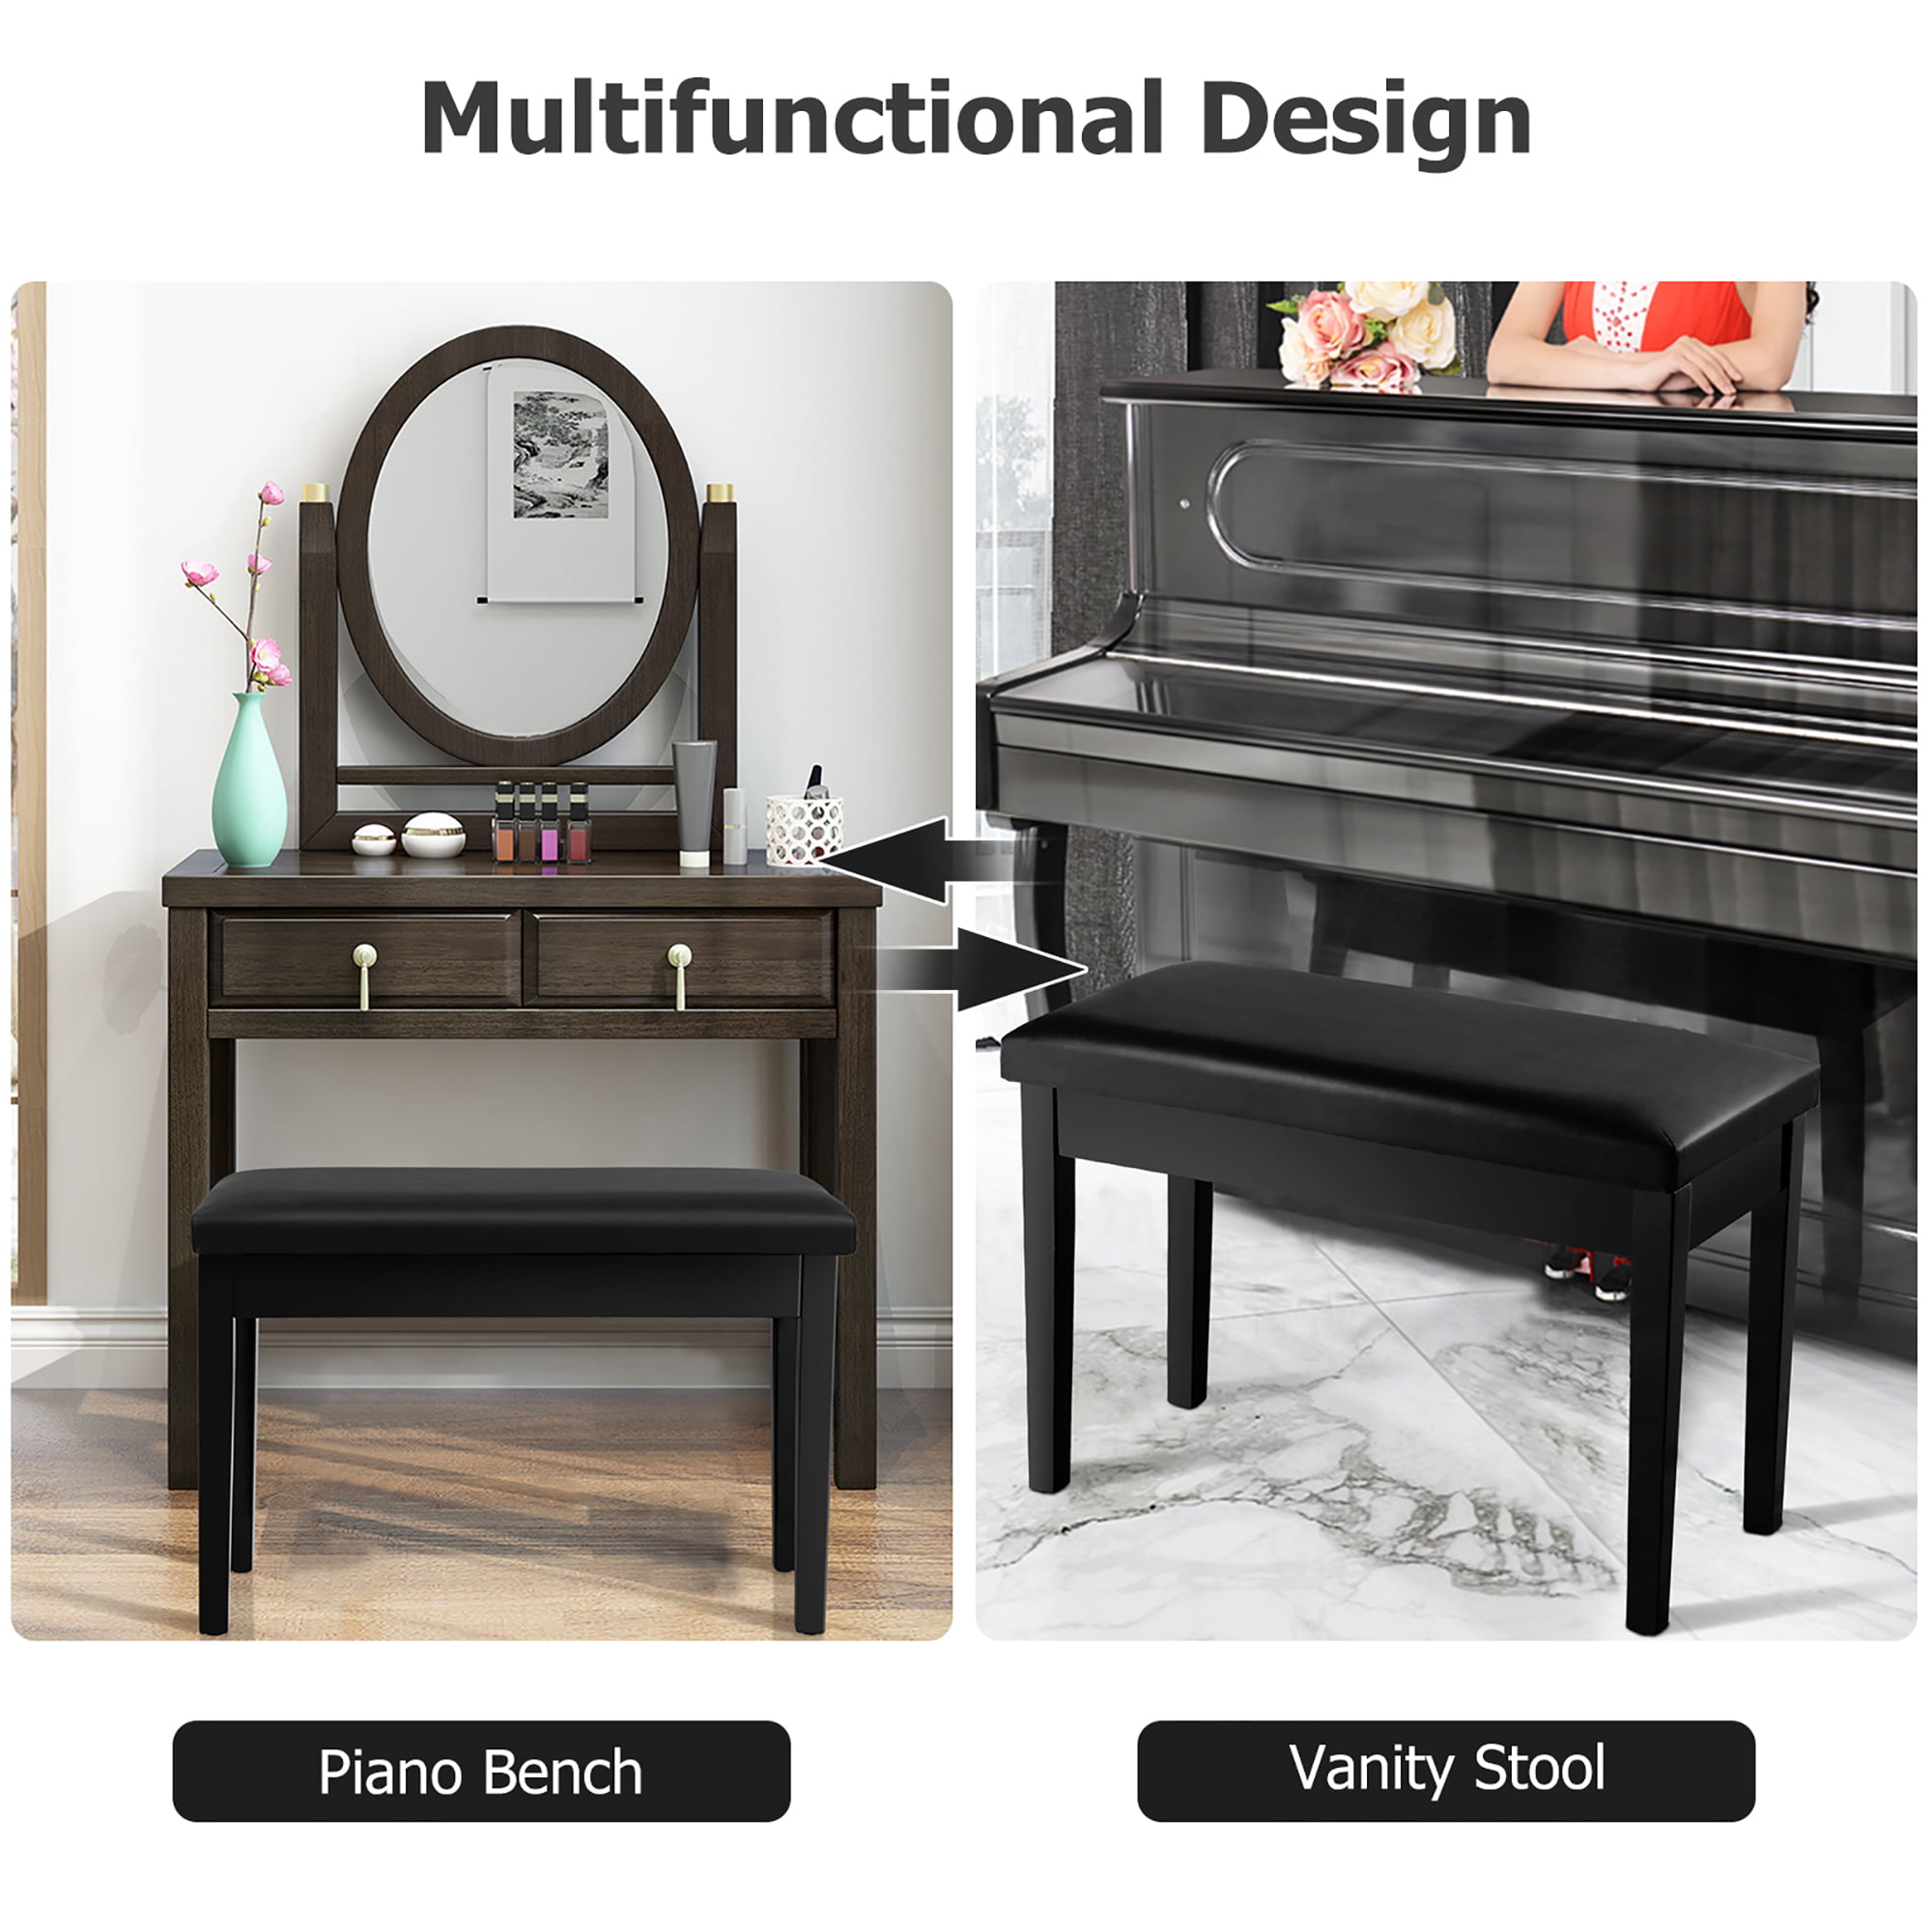 Music Bands 360lbs 30 Heavy Duty Construction and Solid Wood Pu Leather Piano Bench Padded Double Duet Keyboard Seat Storage Suitable for Orchestras Concerts Brown Recording Studio 